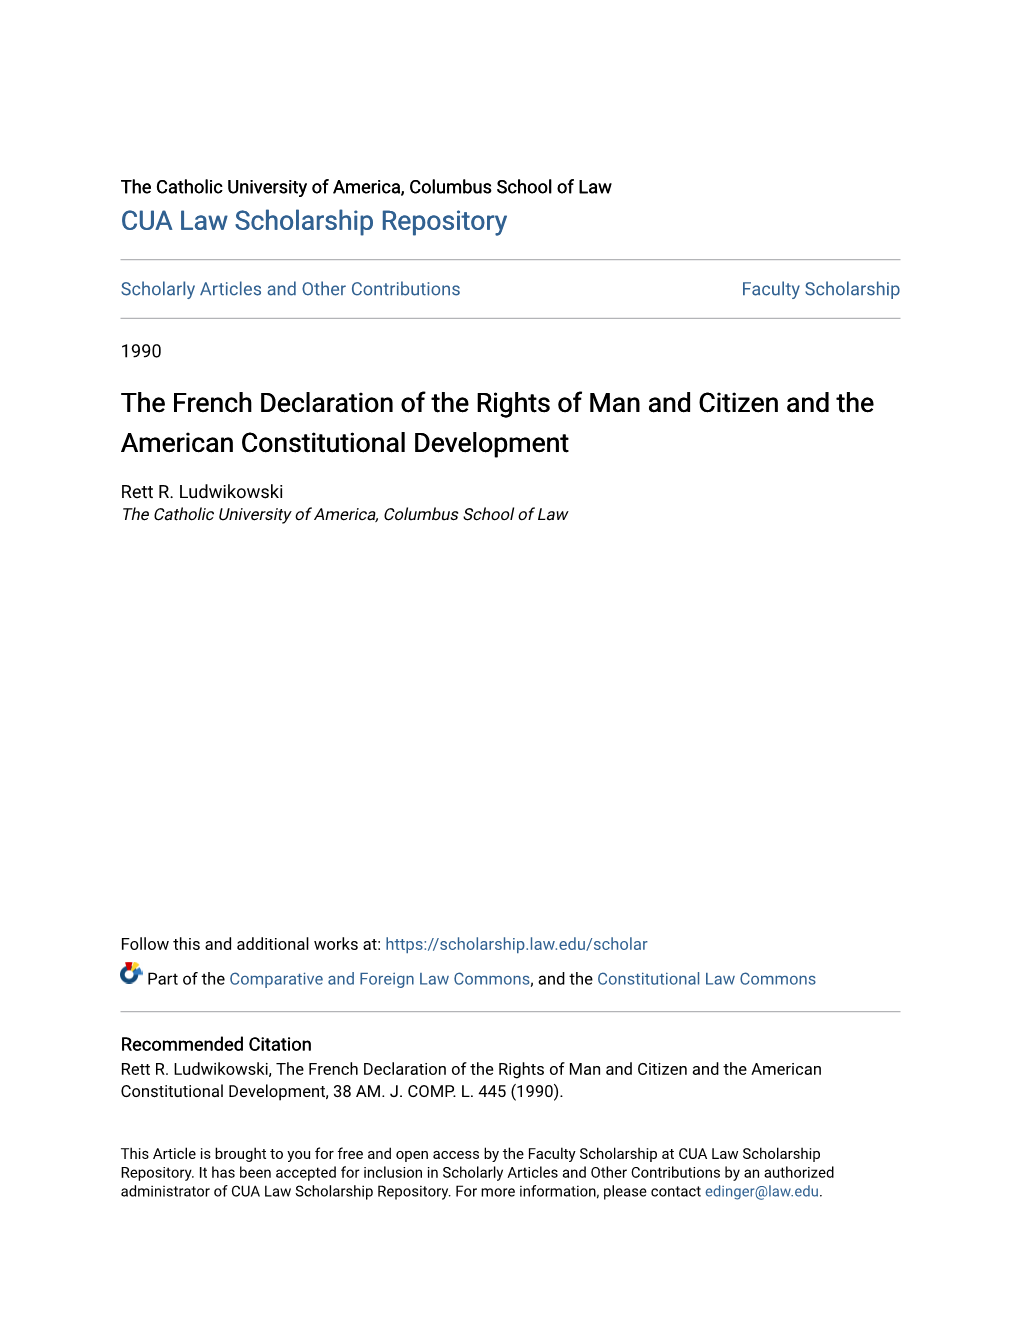 The French Declaration of the Rights of Man and Citizen and the American Constitutional Development